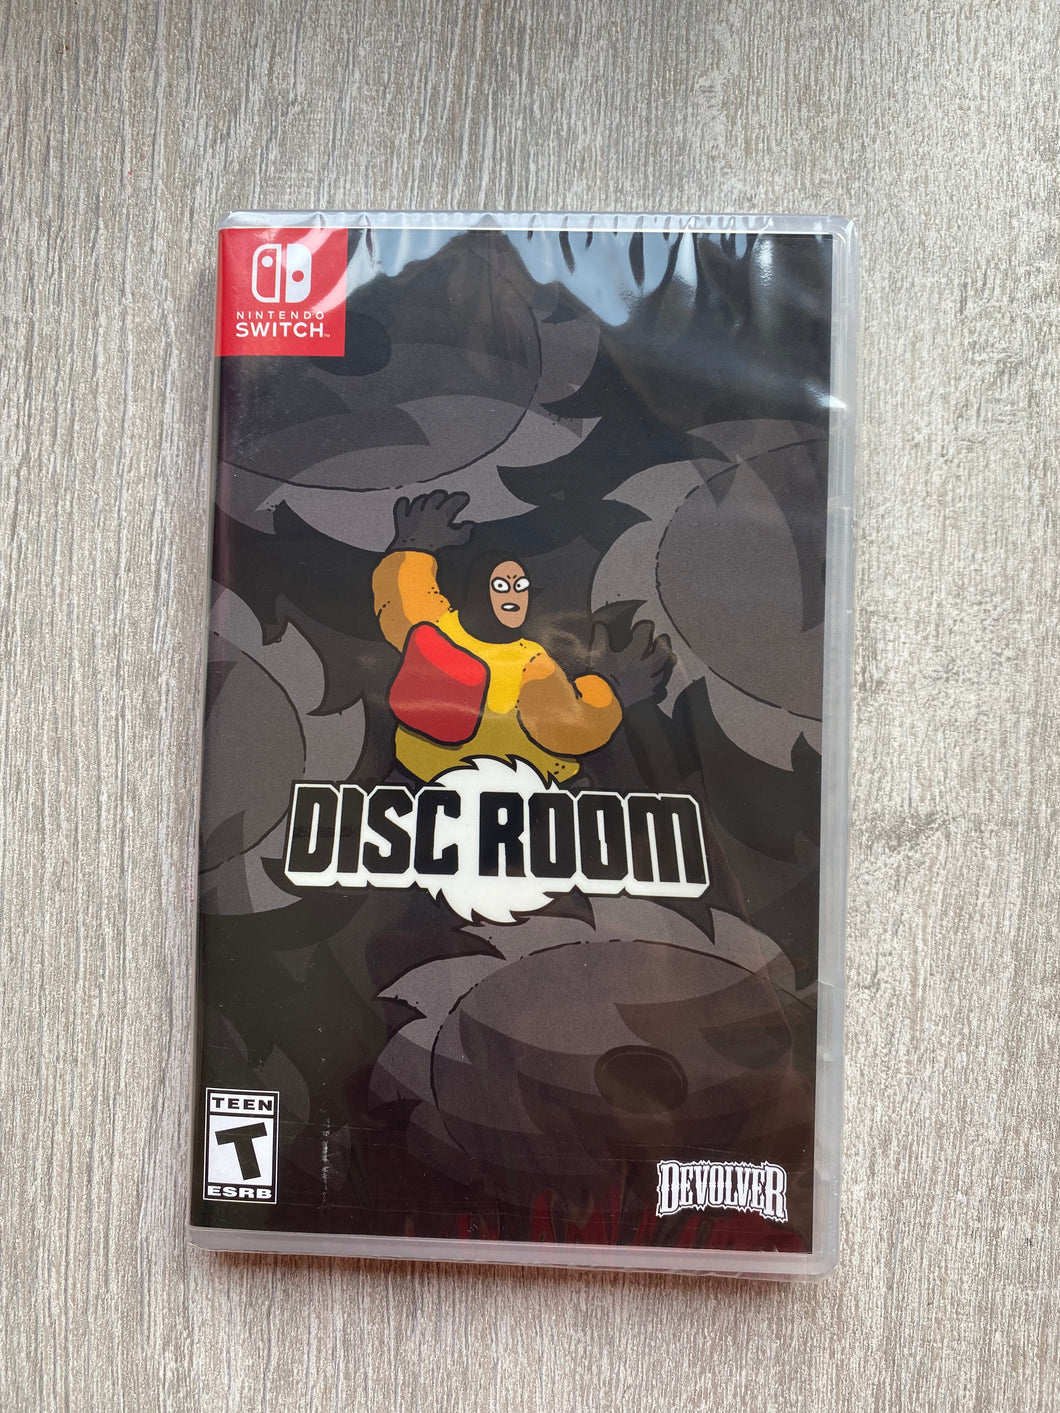 Disc room / Special reserve games / Switch